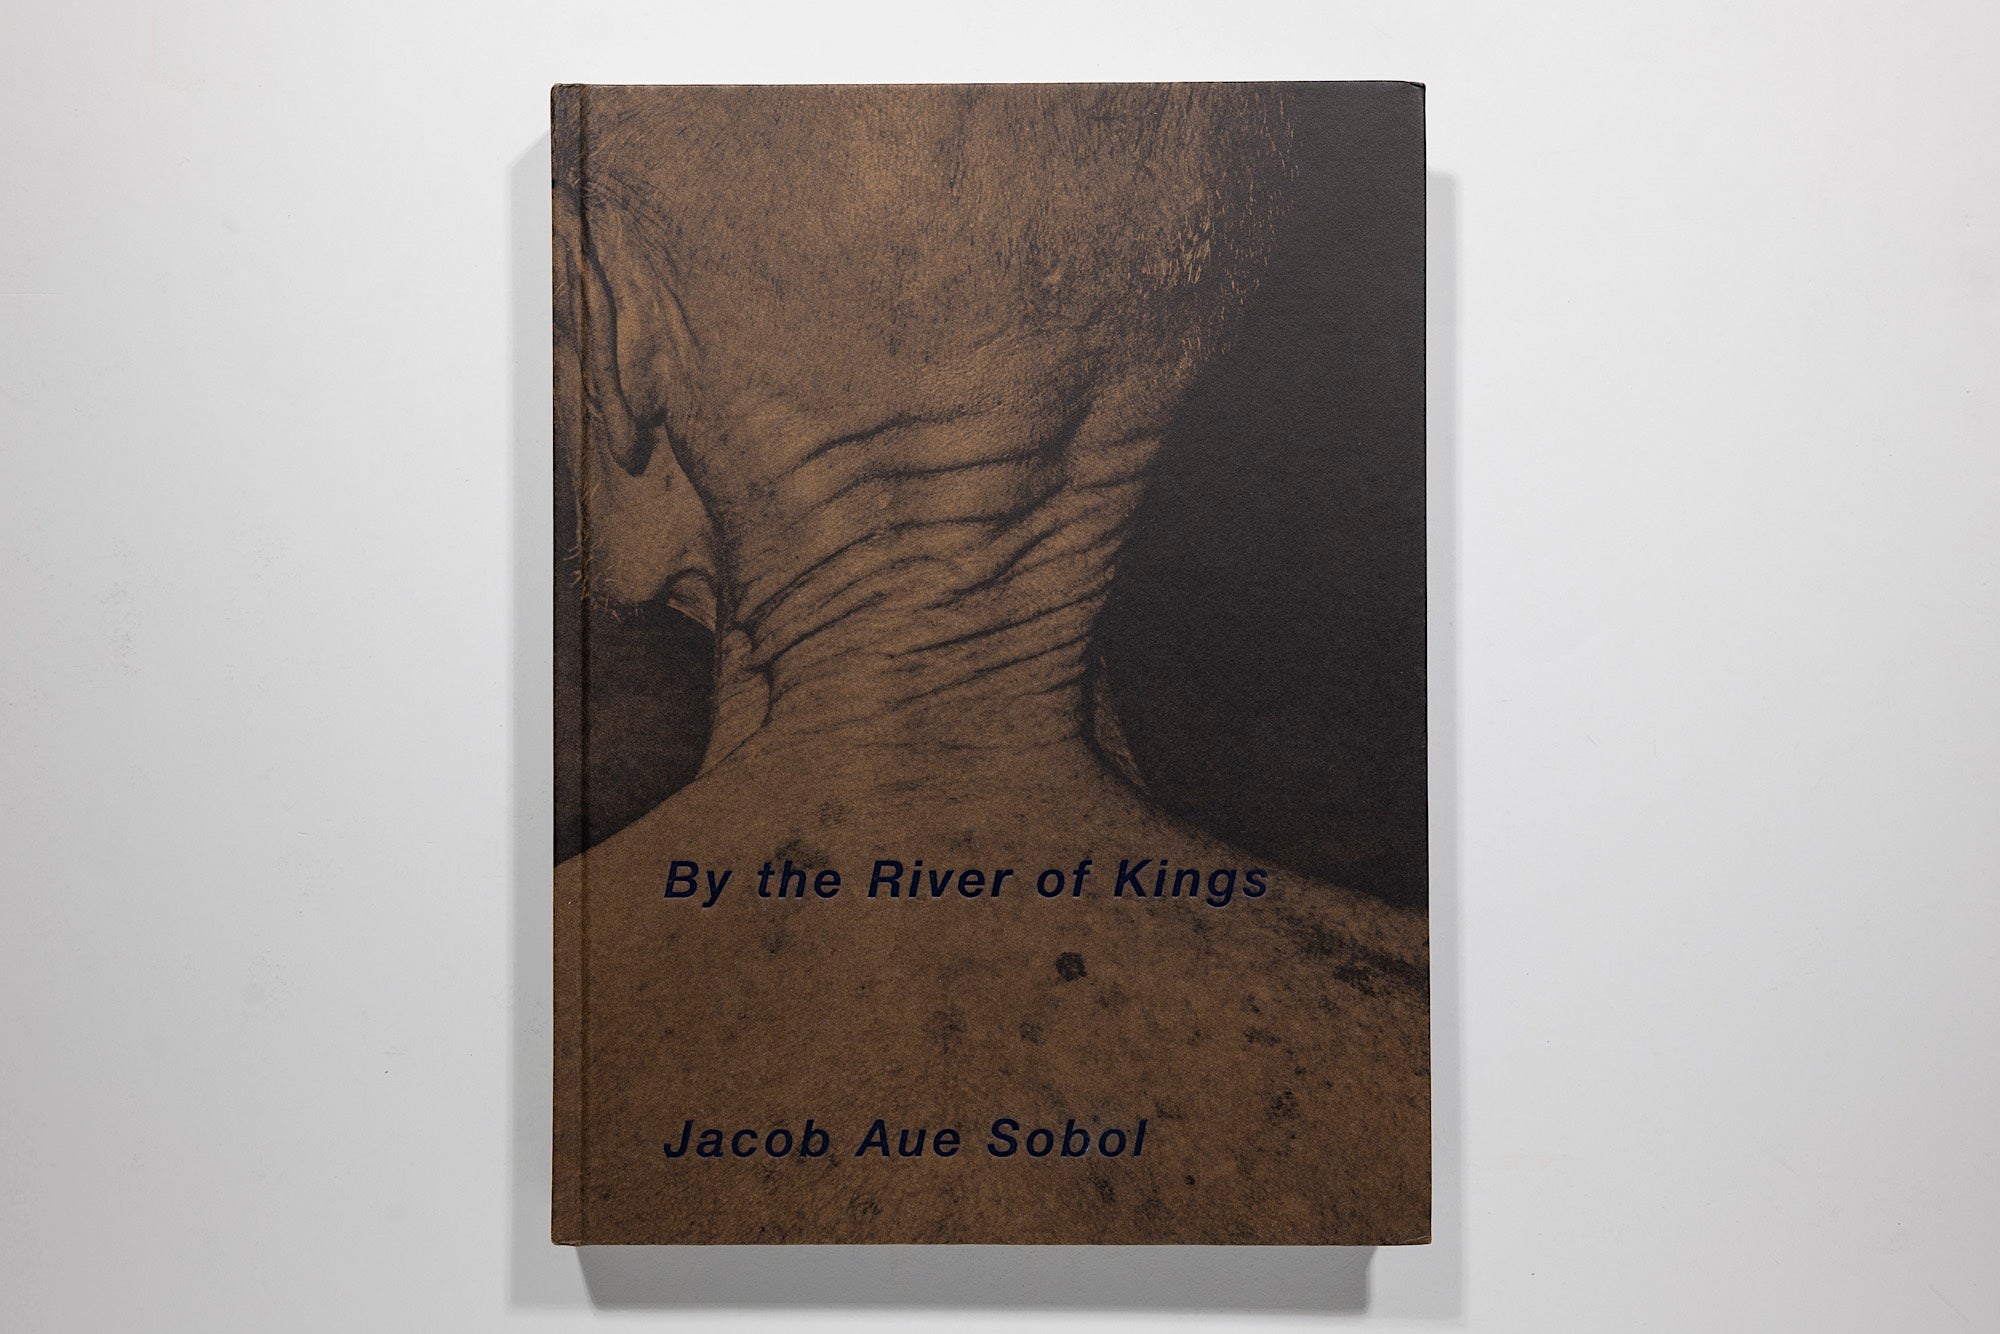 Jacob Aue Sobol - By the River of Kings